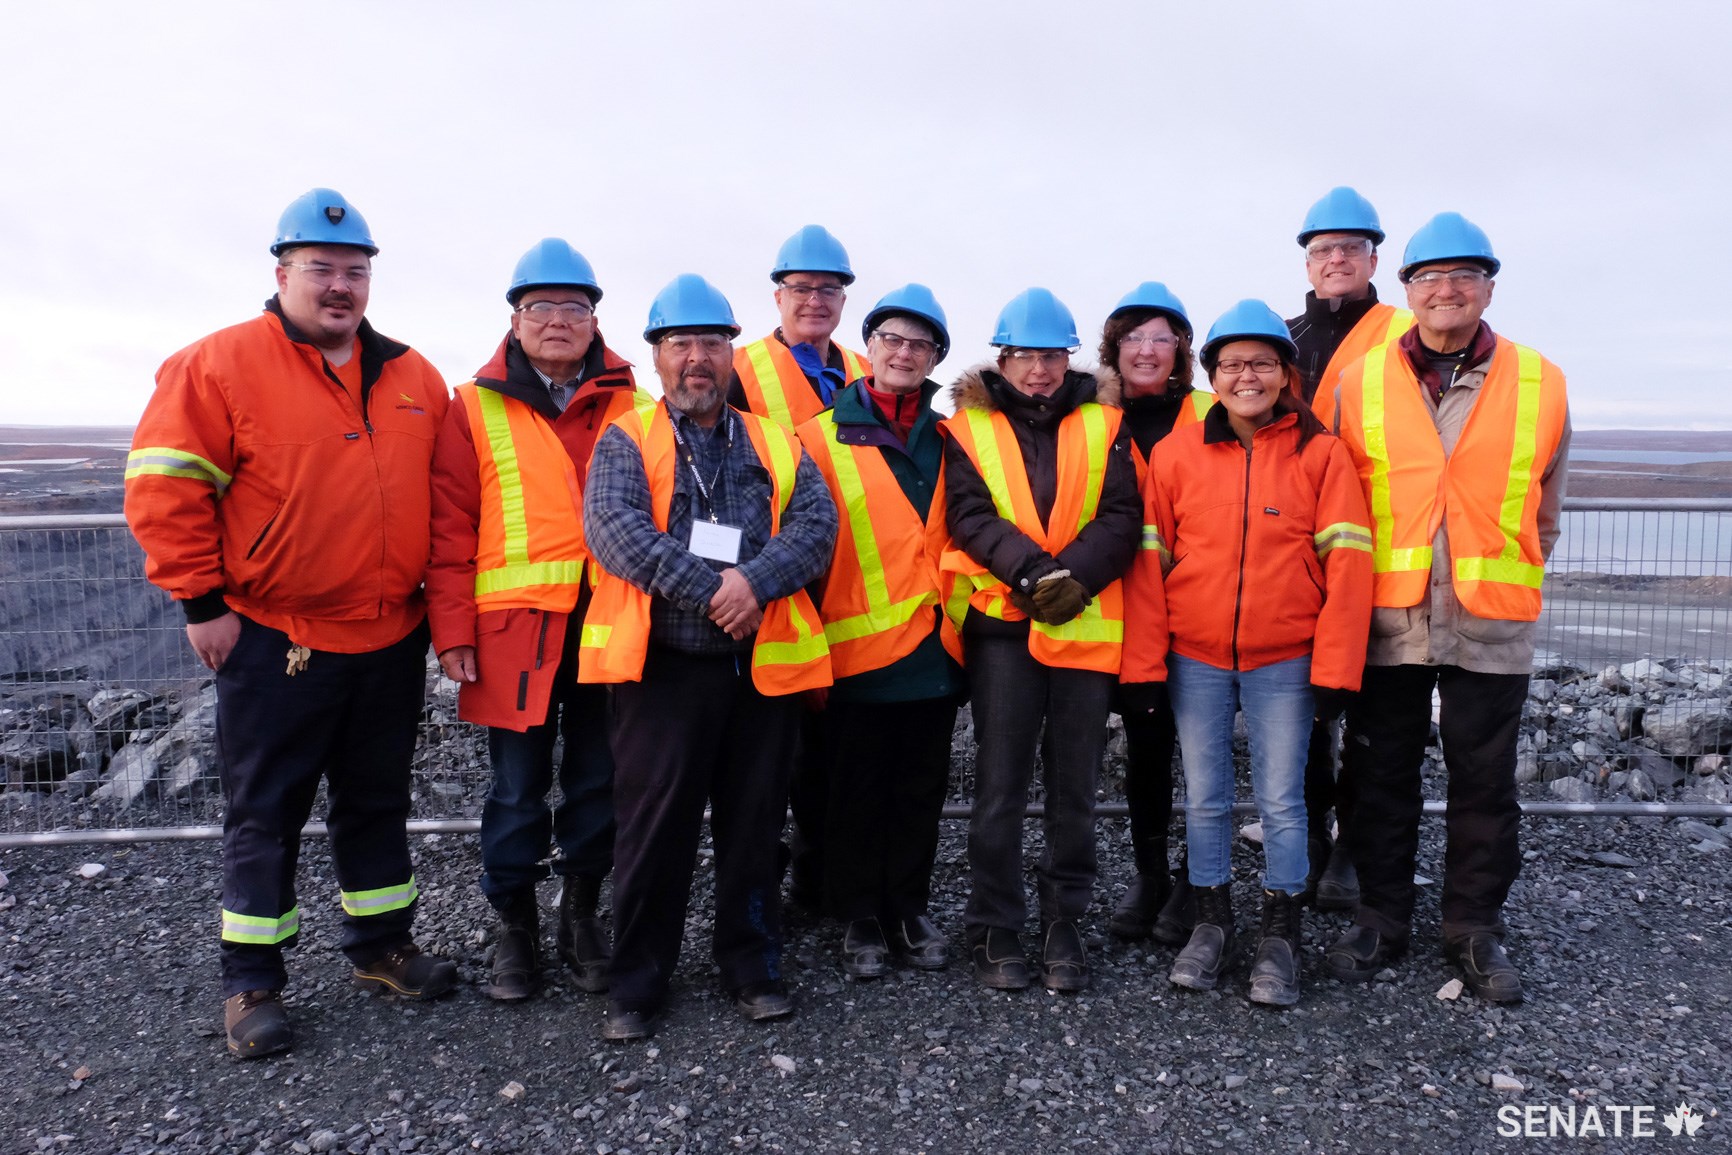 Senators on the Arctic committee pose with employees at Meadowbank Mine in the Kivalliq region of Nunavut, located 110 kilometres north of Baker Lake. Agnico Eagle Mines operates the gold mine and employs more than 2,000 workers, many of whom identify as Inuit. An impact benefit agreement with the Kivalliq Inuit Association created economic development funds for training and hiring of Inuit workers. In 2017, 38% of all training at the mine was dedicated to Inuit employees and 66% of the female workforce was Inuit.